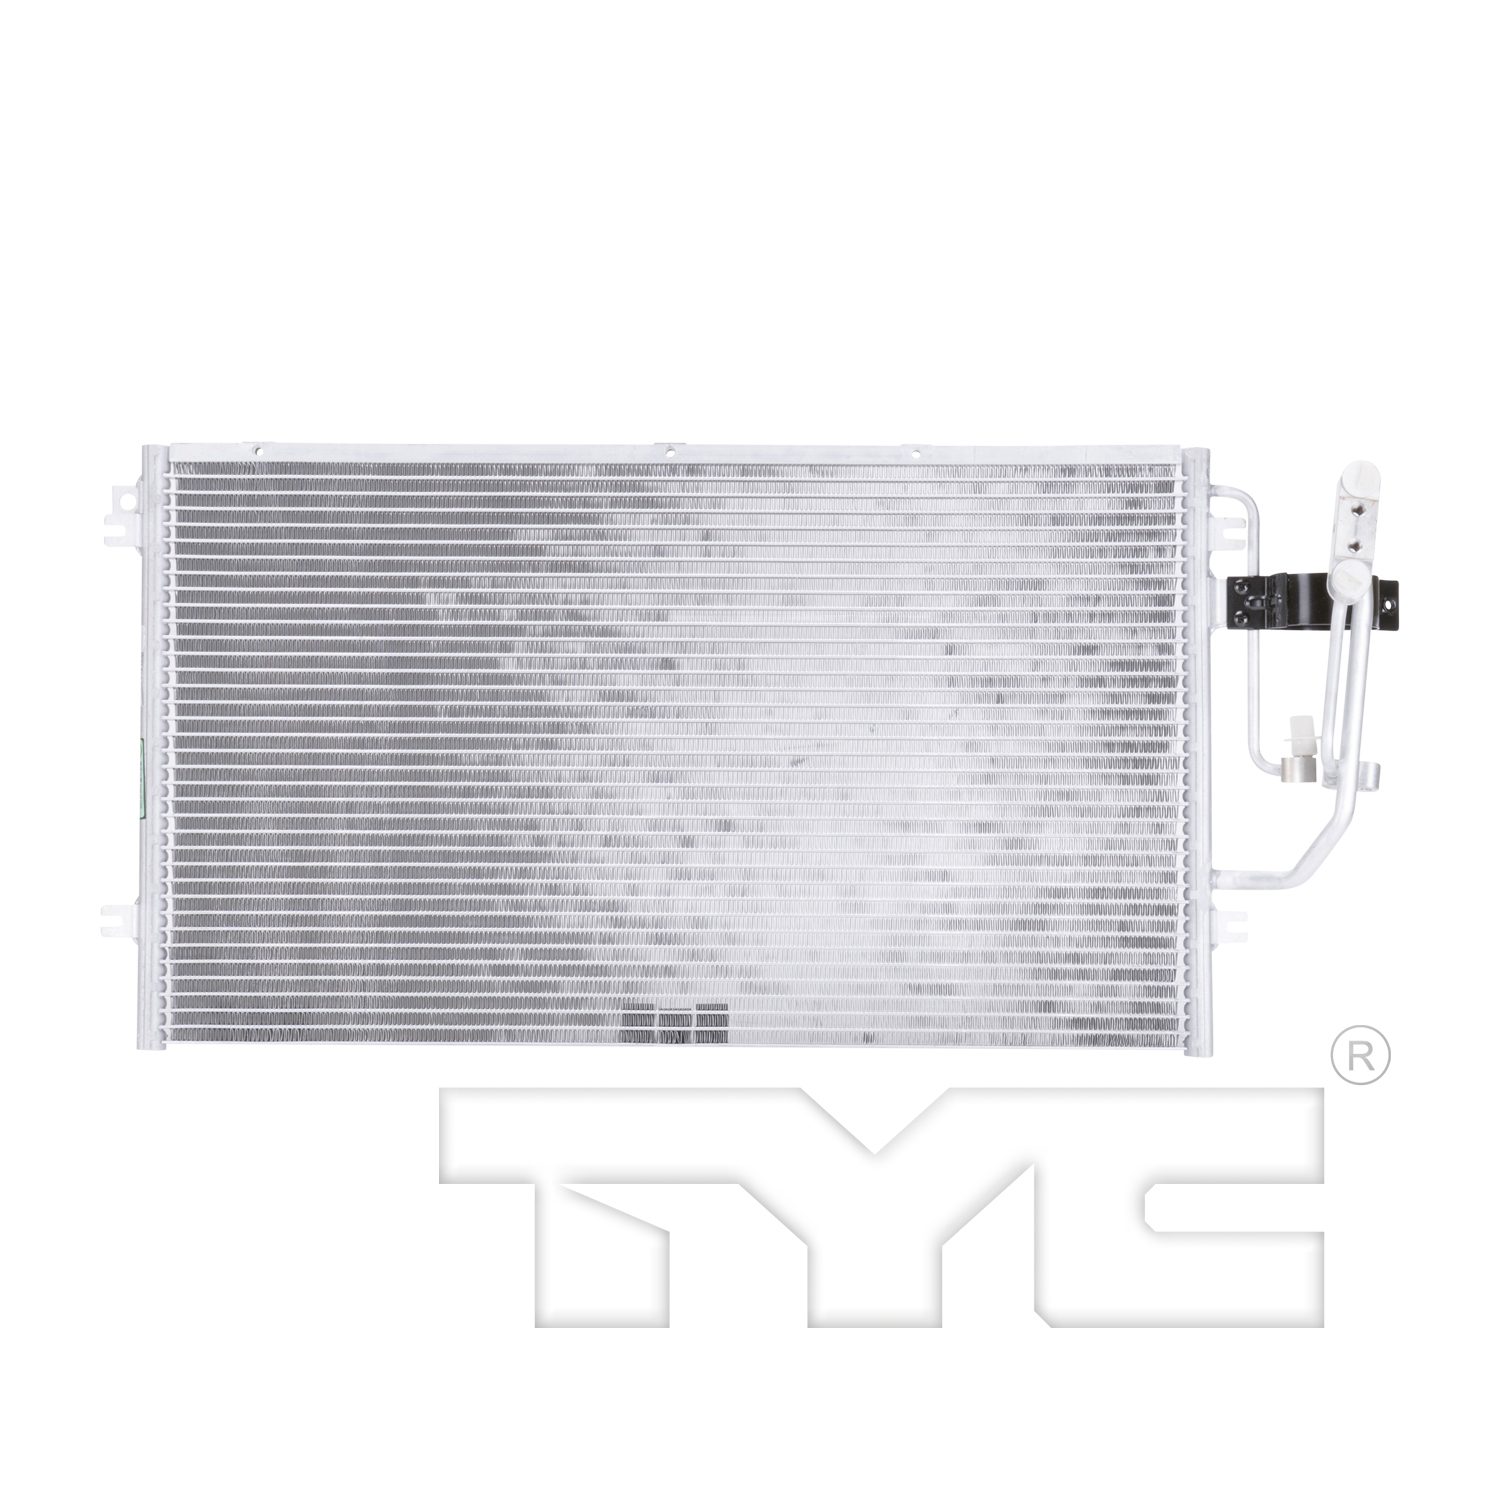 Aftermarket AC CONDENSERS for SATURN - L200, L200,01-03,Air conditioning condenser